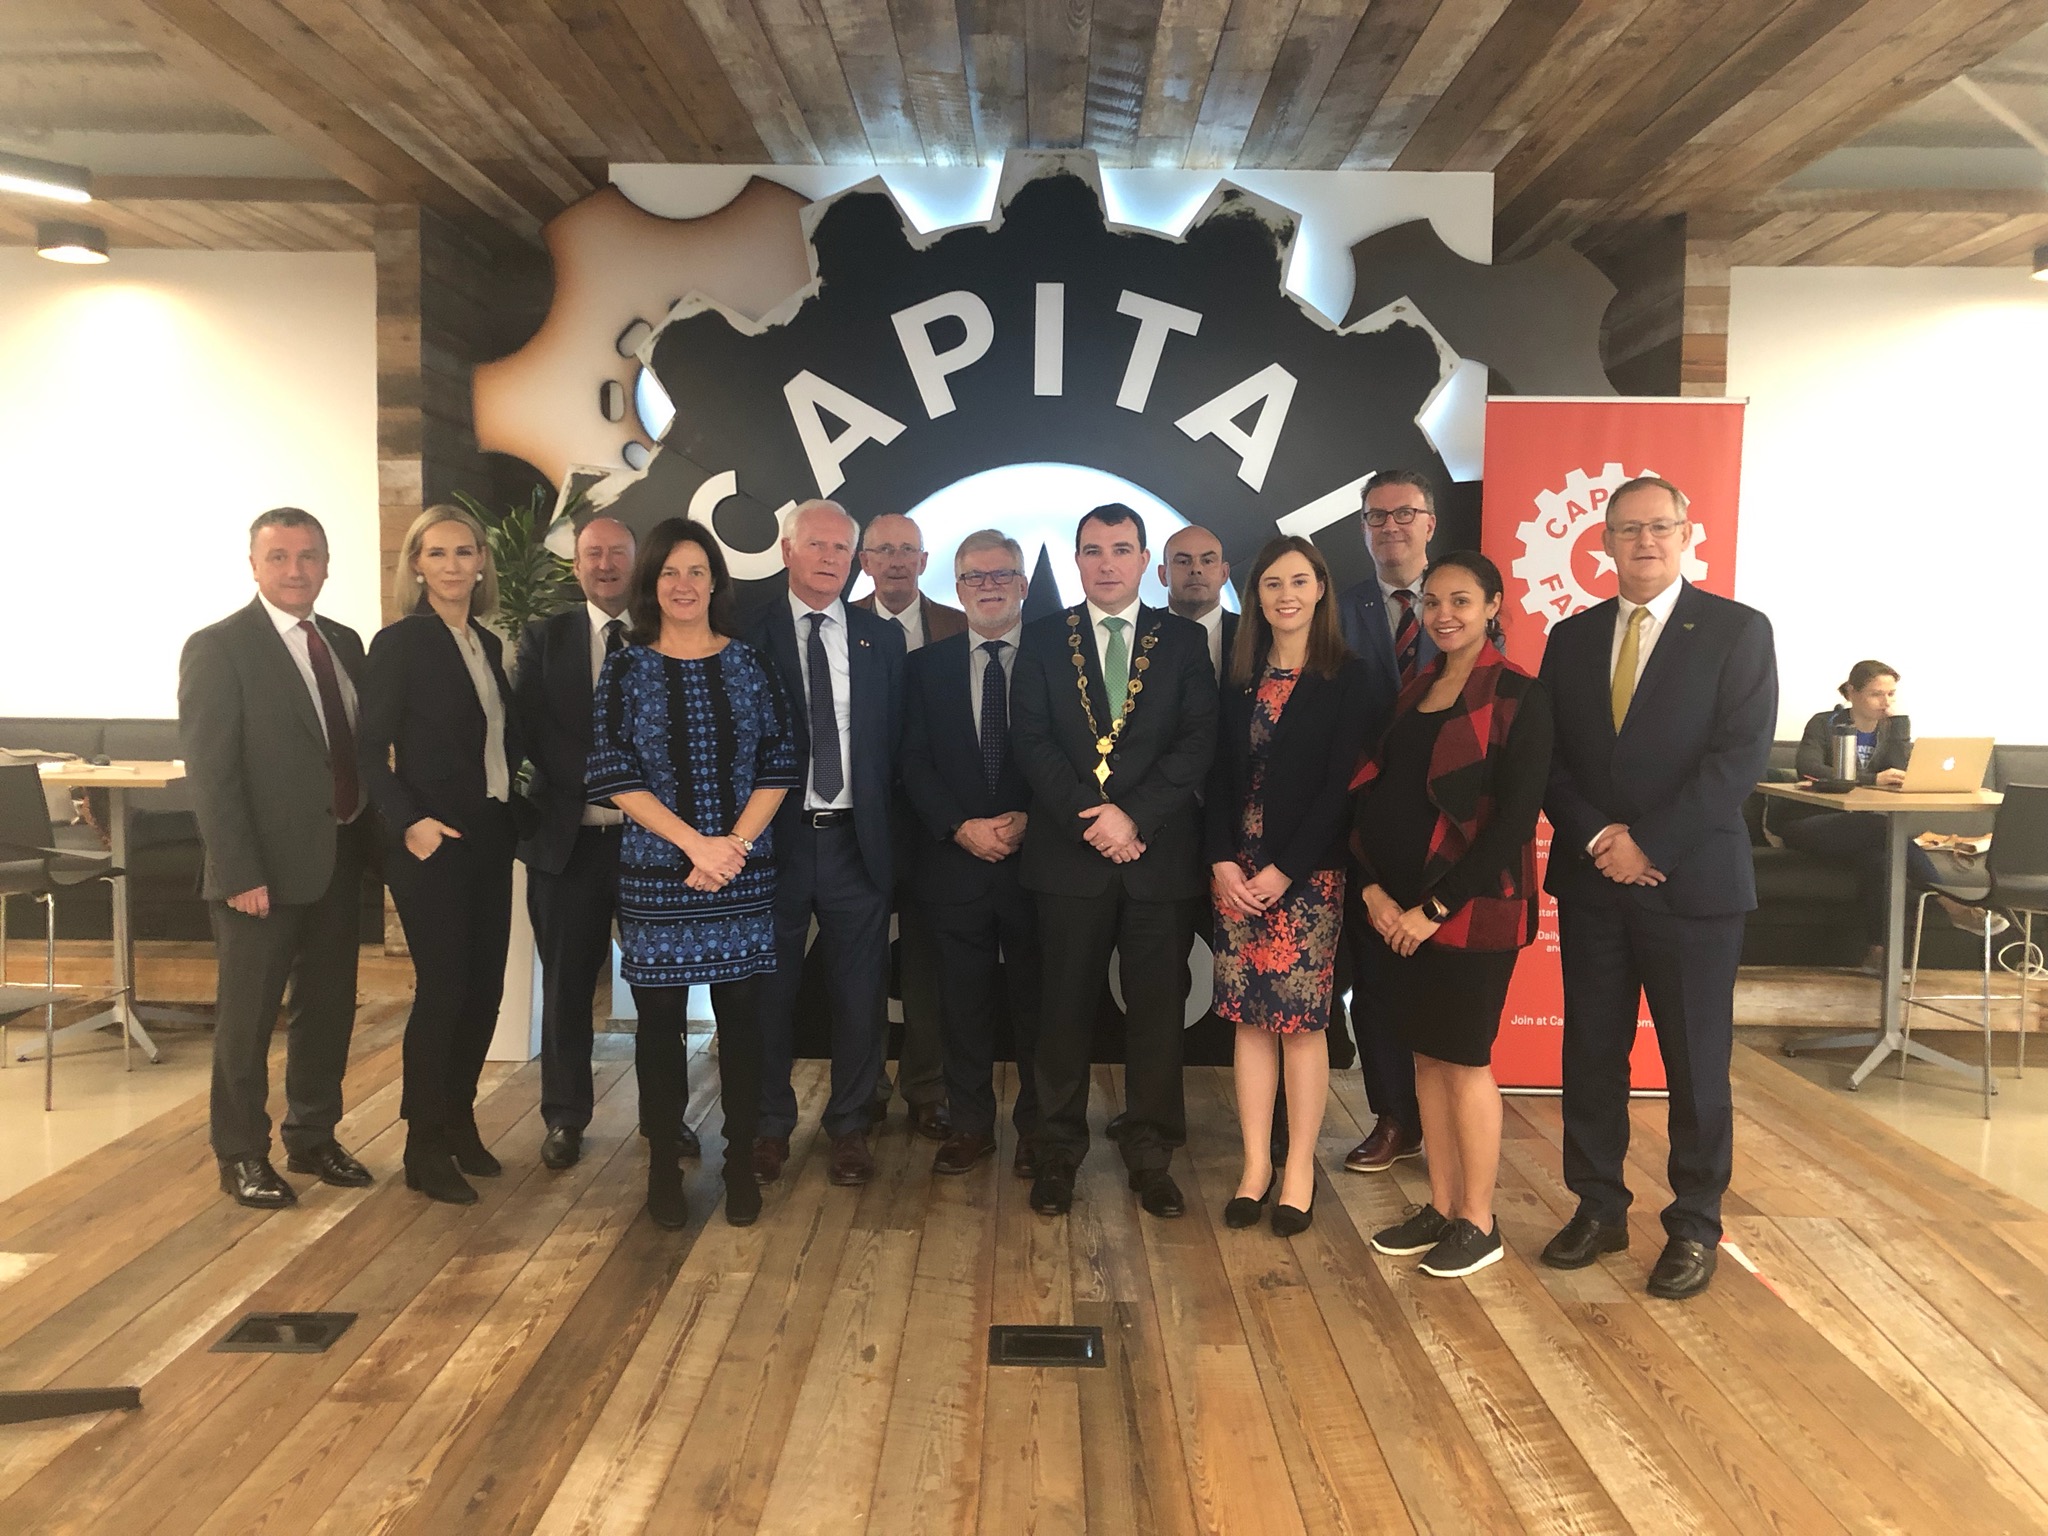 The delegation from Limerick visited Capital Factory, a meeting place for entrepreneurs, investors, business mentors and customers in Texas. 